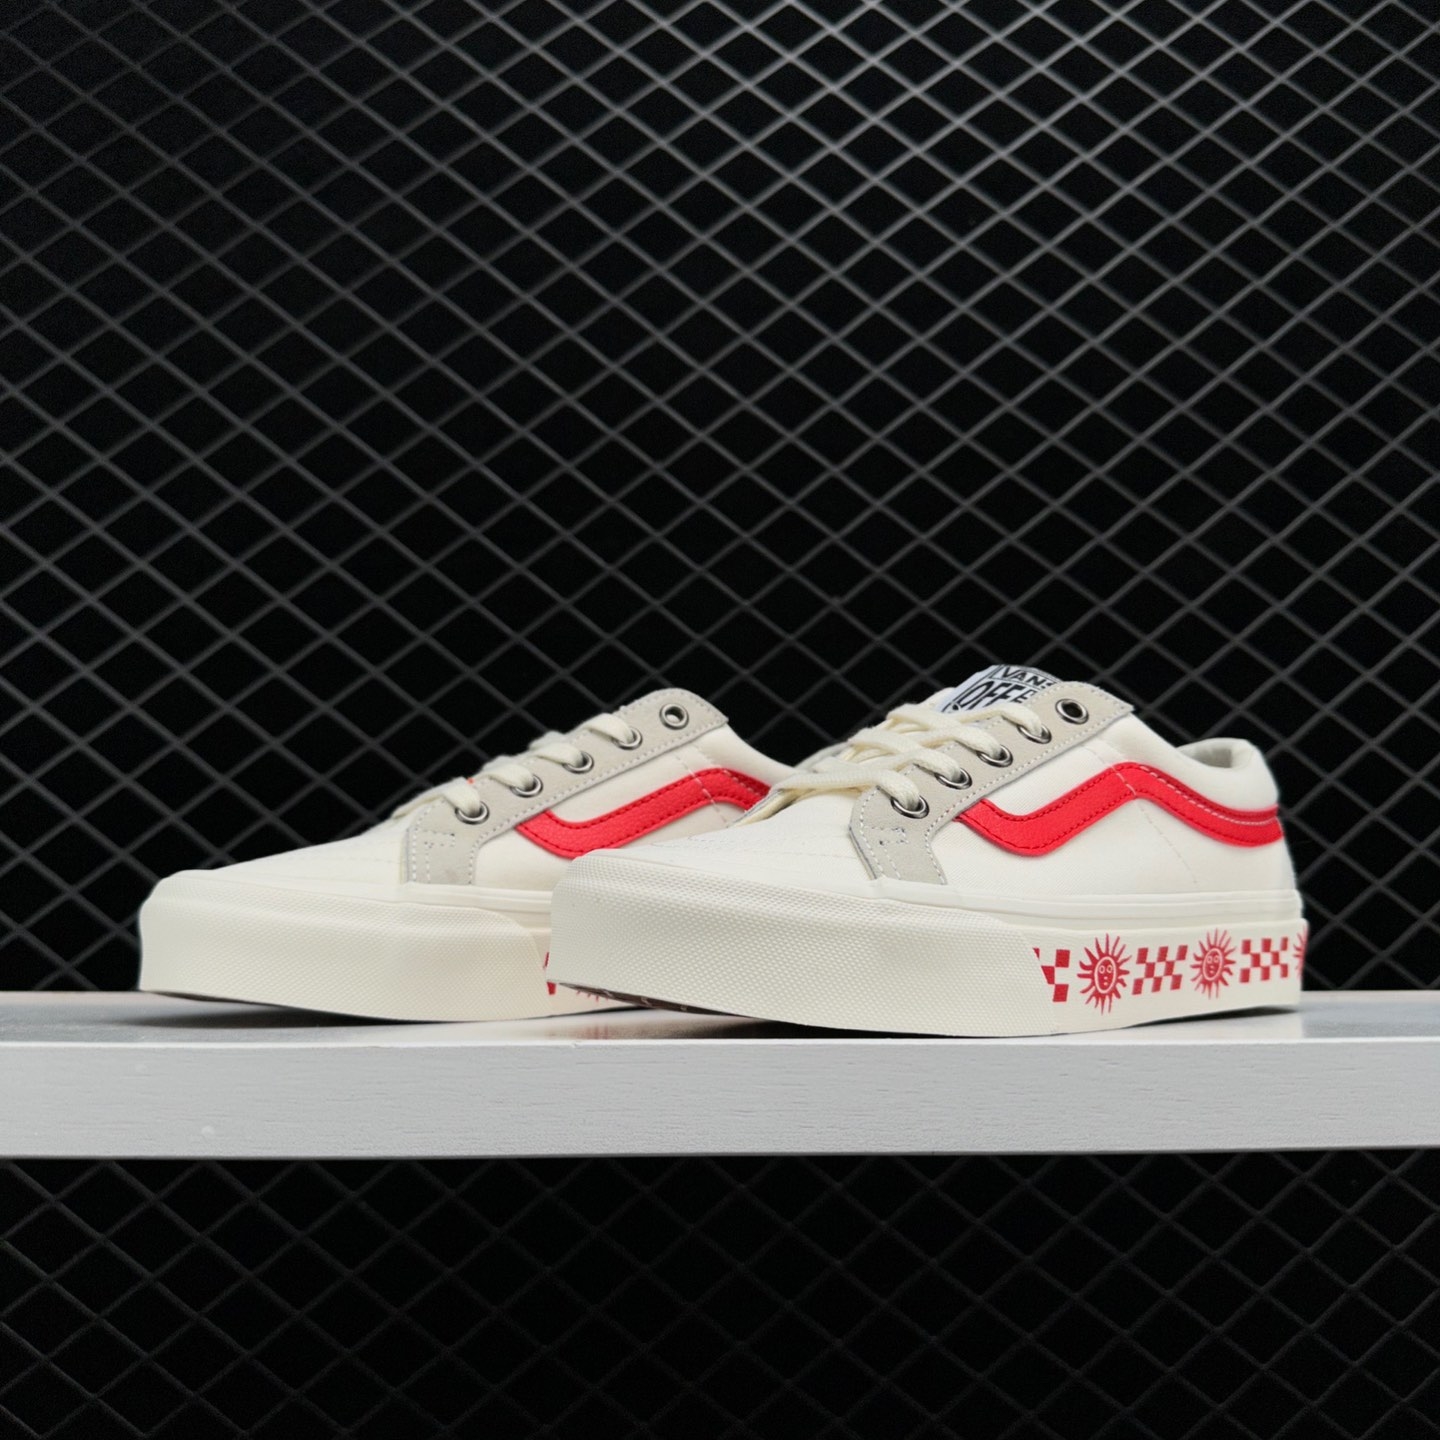 Vans SK8-Low 'White Red' VN0A4UWIB80 - Classic Style Sneakers in White and Red